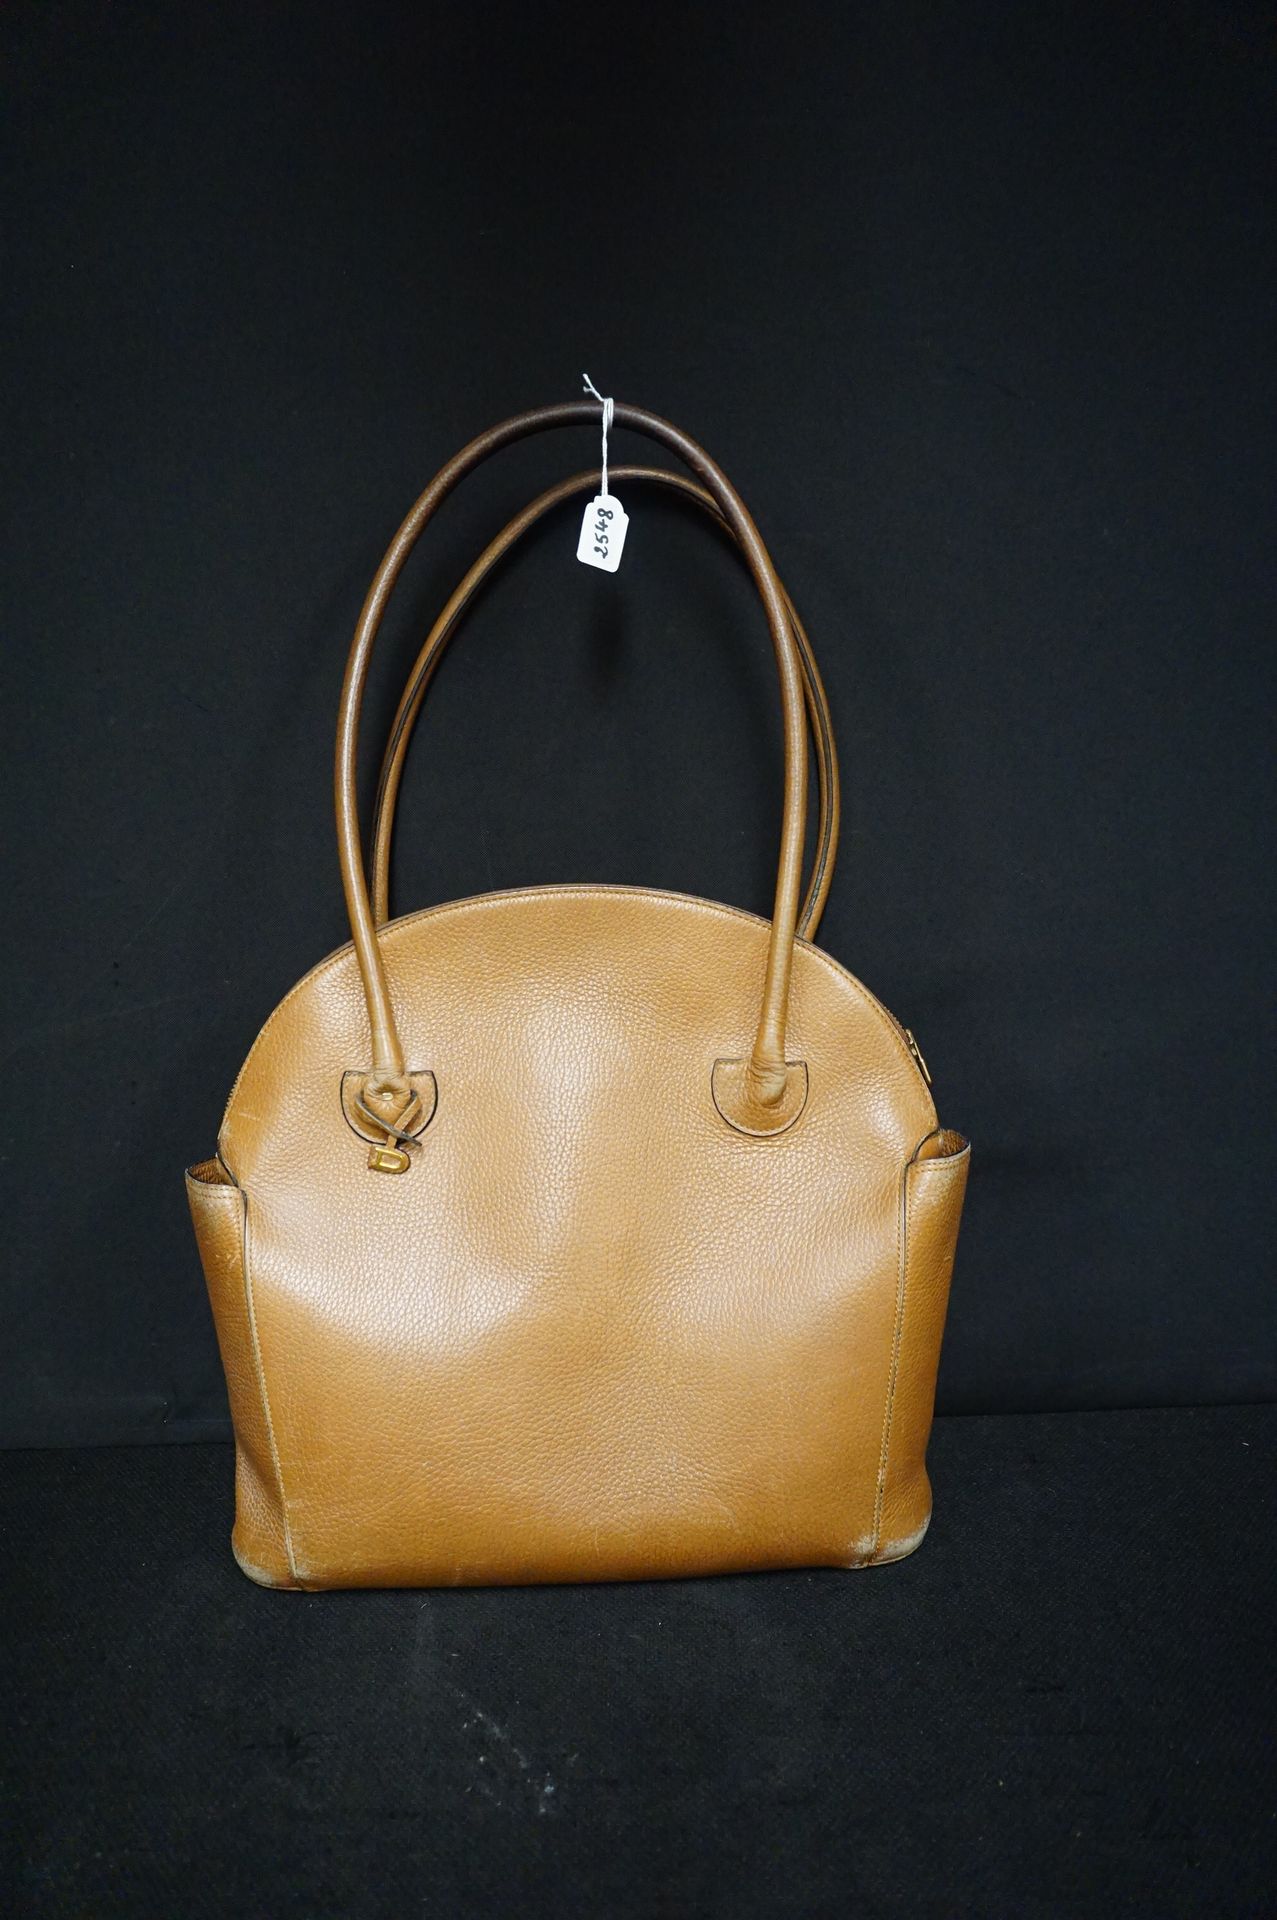 DELVAUX Original handbag in brown leather - signs of use